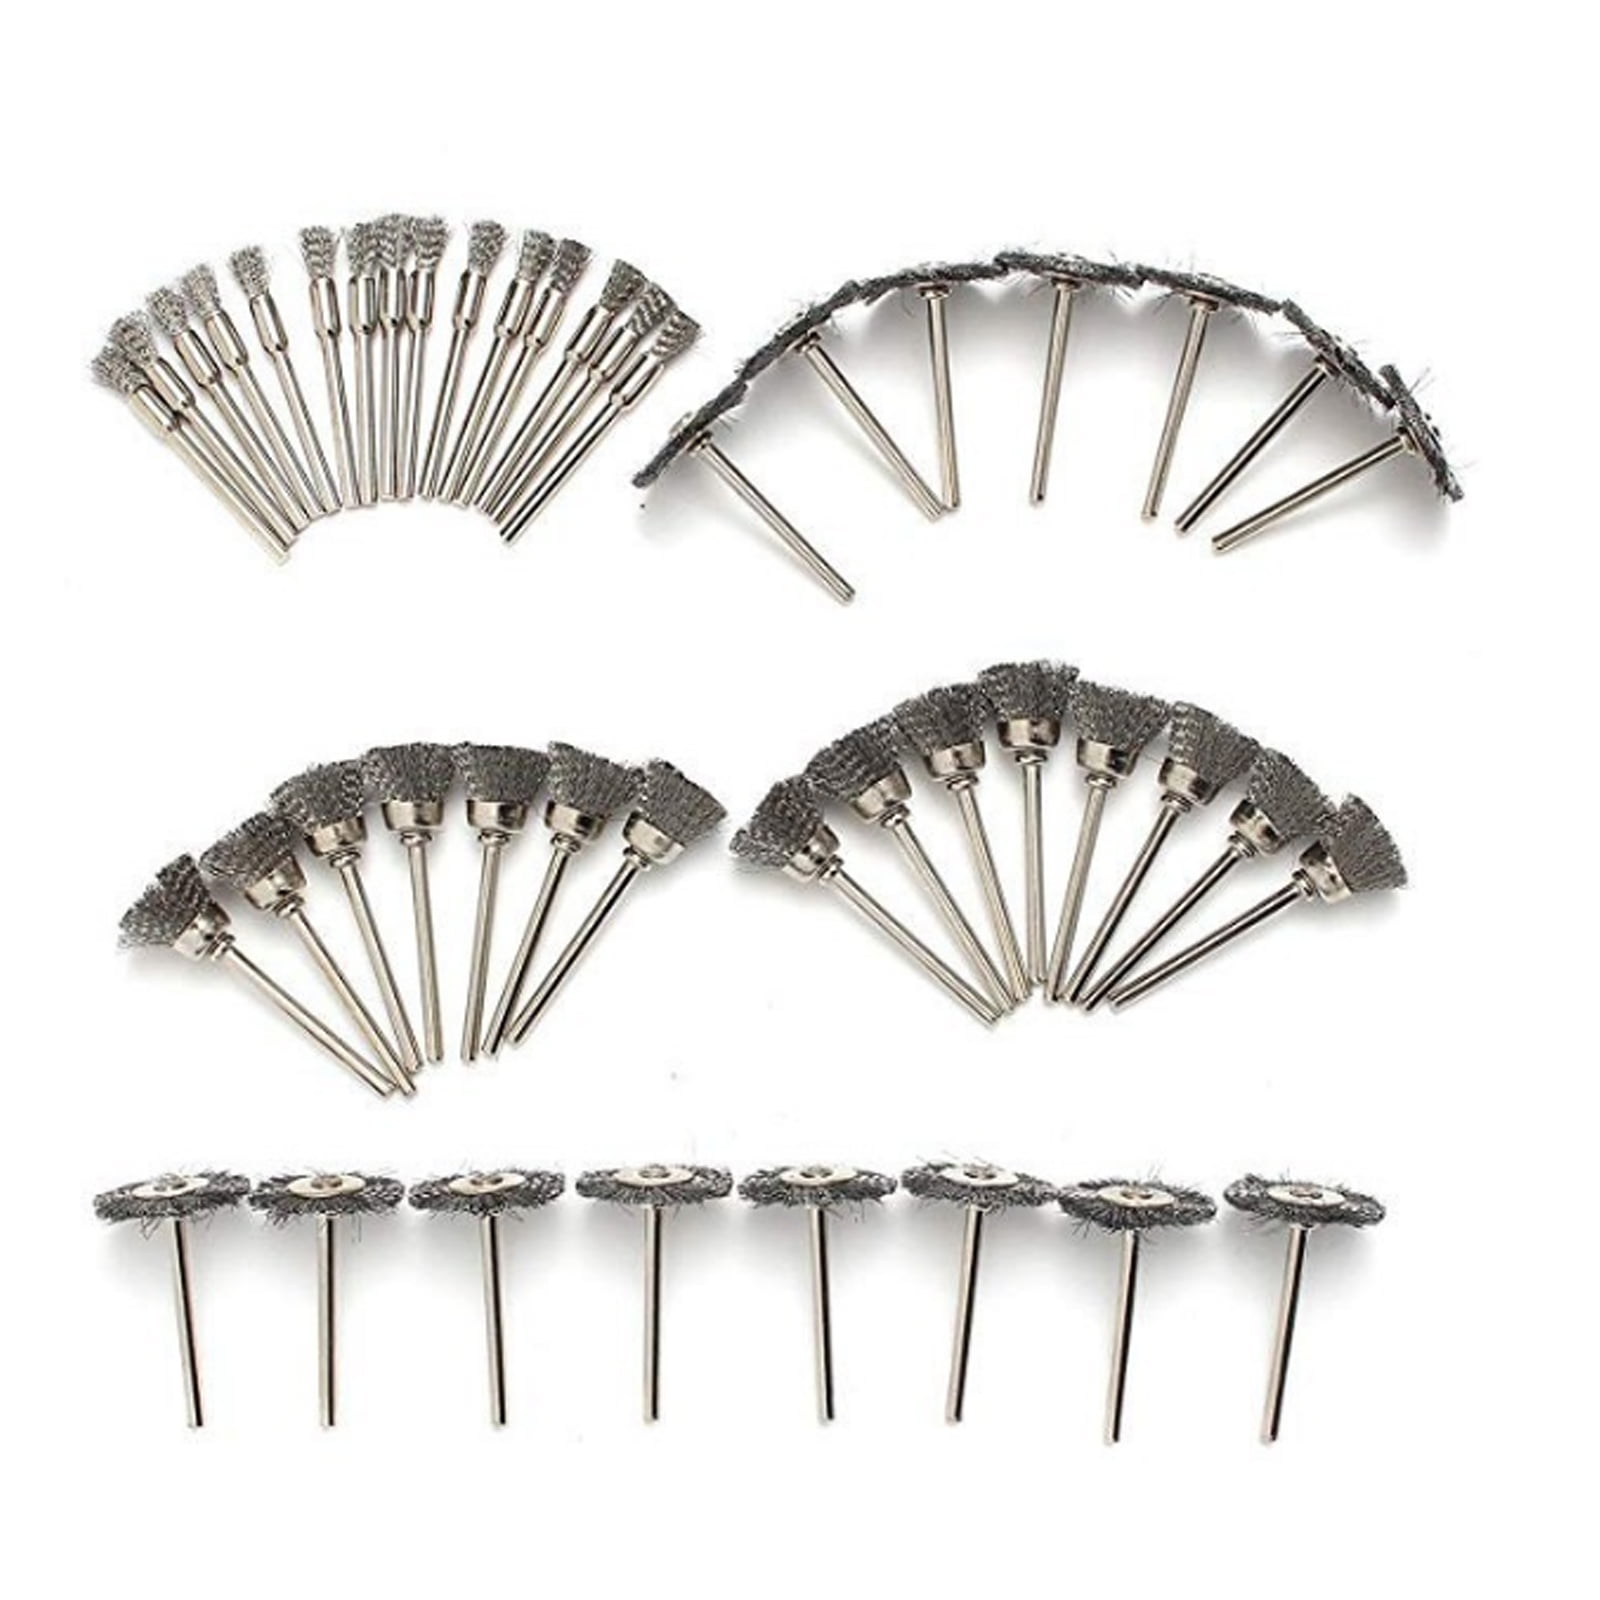 24Pcs Stainless Steel Wire Brush Set Dremel Rotary Tool Die Grinder for Removal